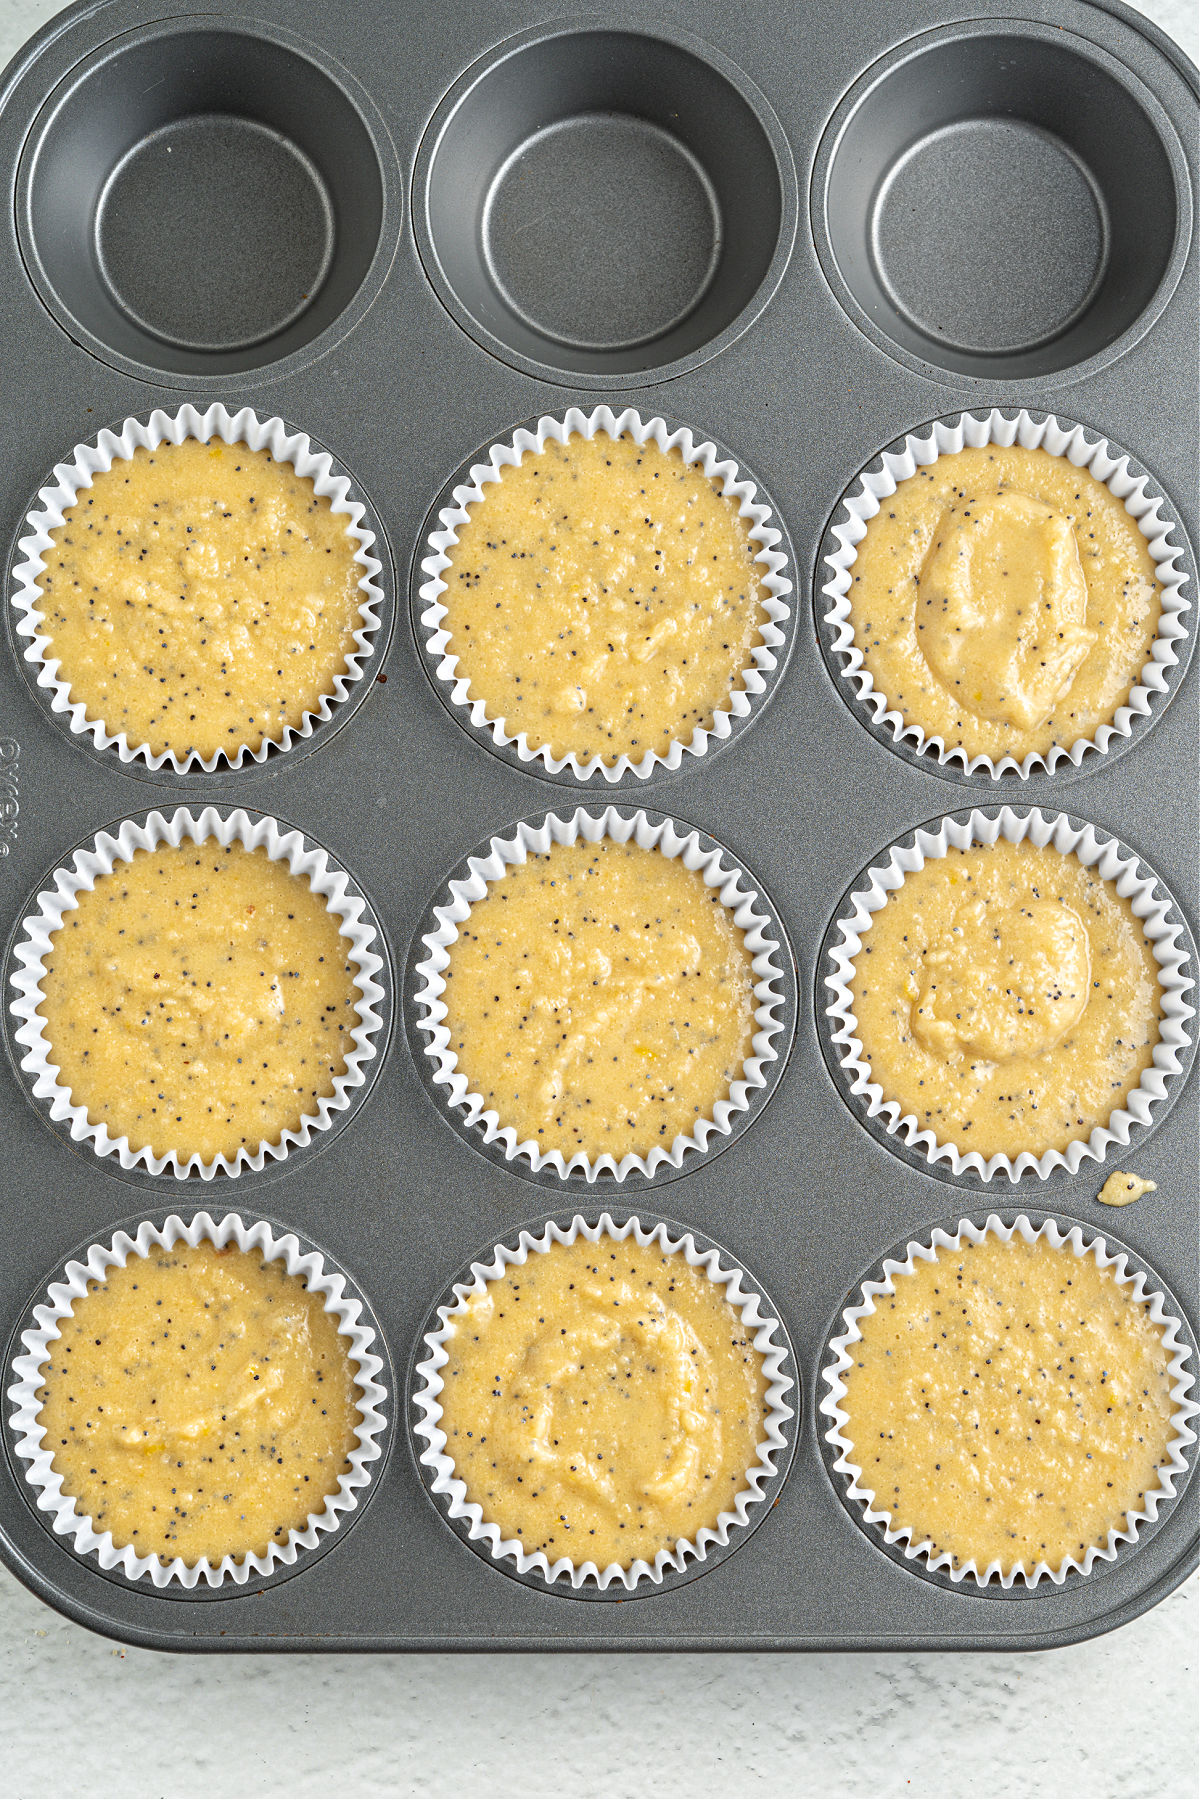 Lemon muffin batter unbaked in a cupcake tin.